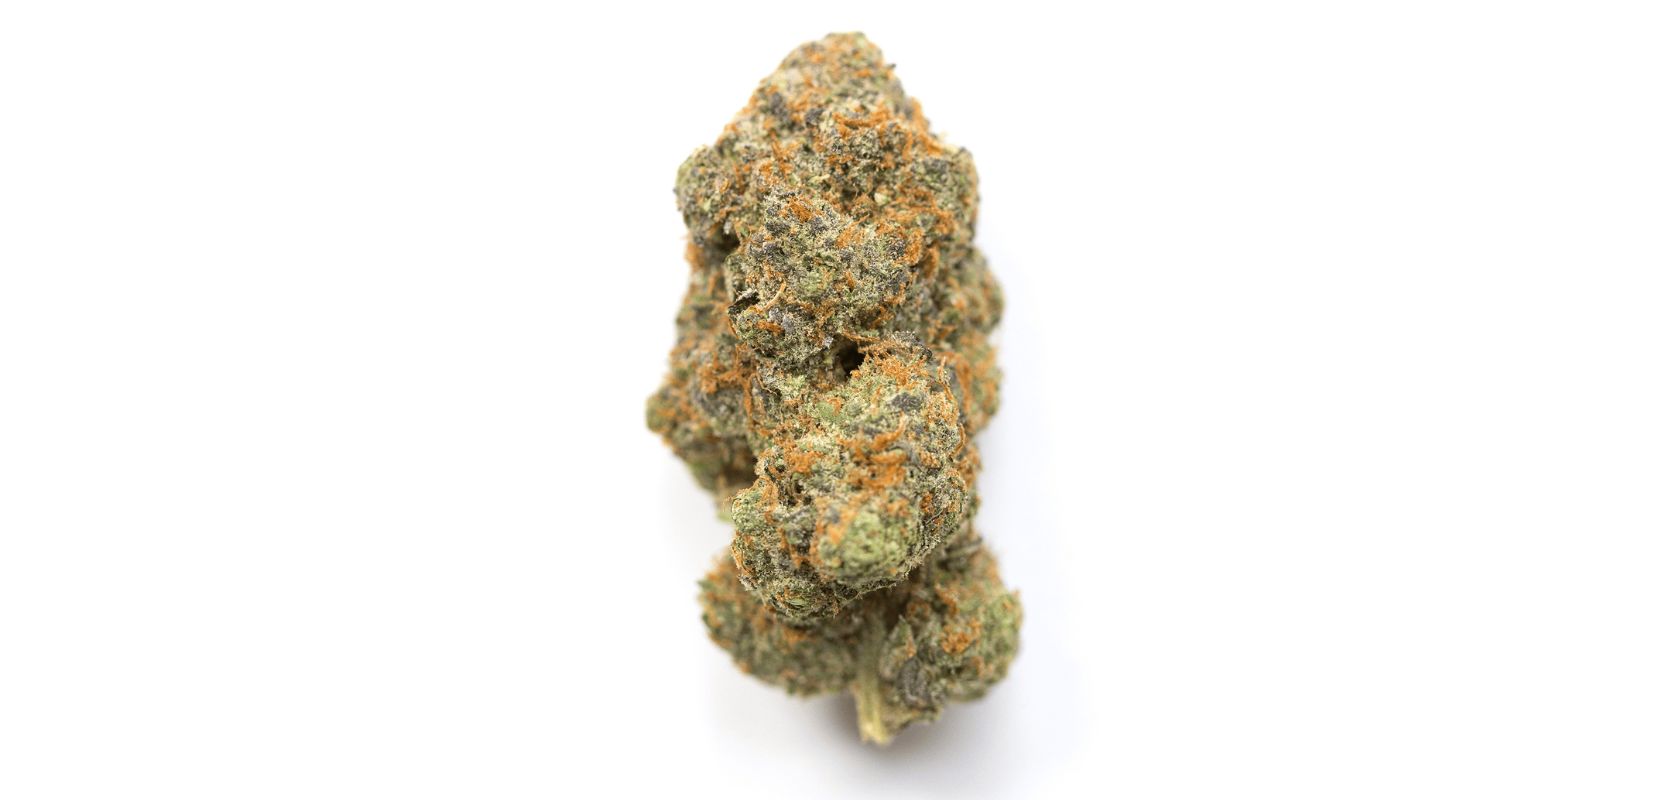 El Chapo strain is mostly Indica, which means it leans towards making you feel relaxed and calm. But it's not all sleepy vibes – there's a bit of sativa in there, too, giving you a touch of uplifting feelings.